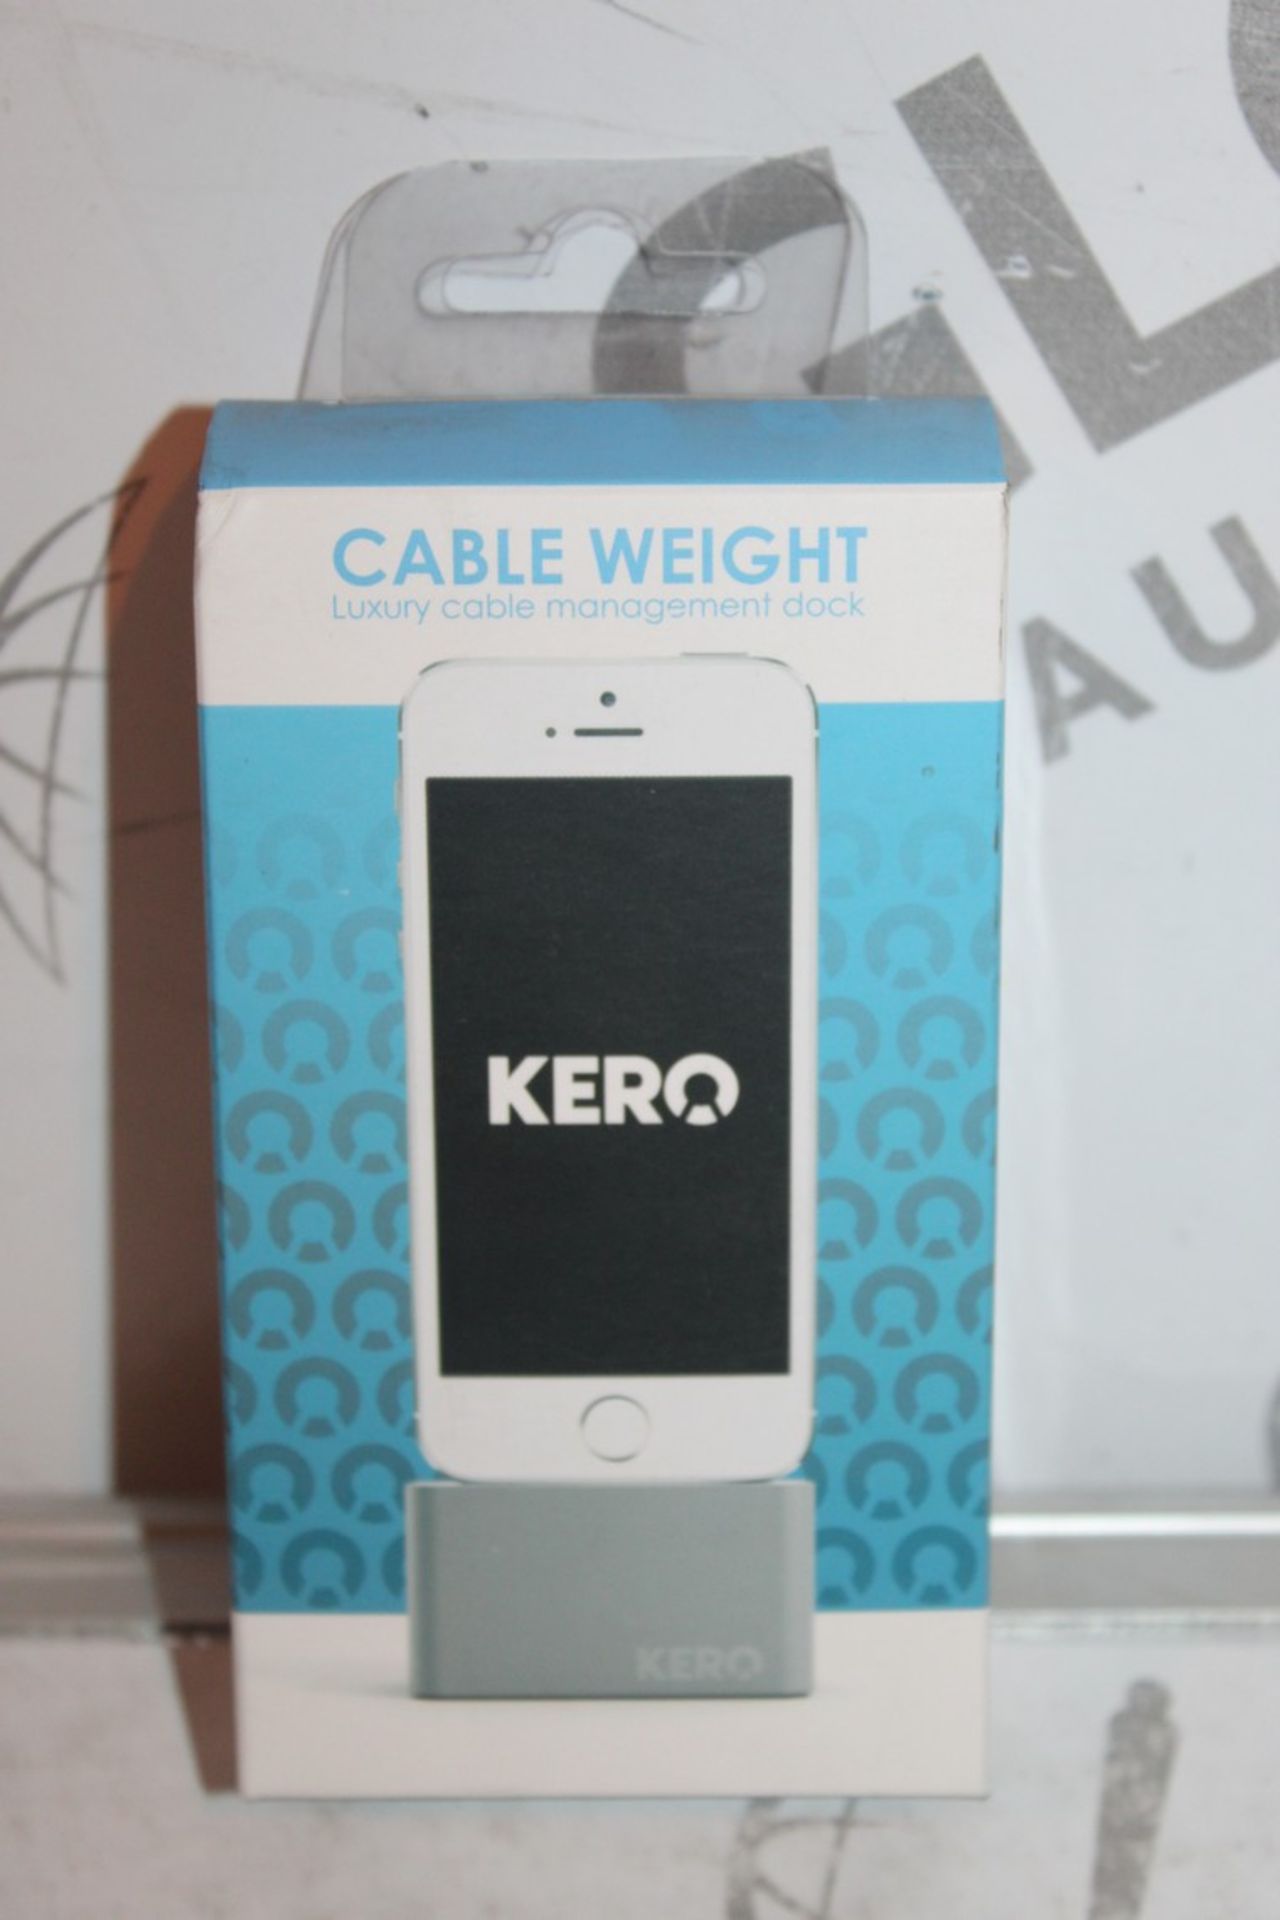 Lot to Contain 5 Brand New Kero Cable Weight Luxury Cable Management Dock Combined RRP £175